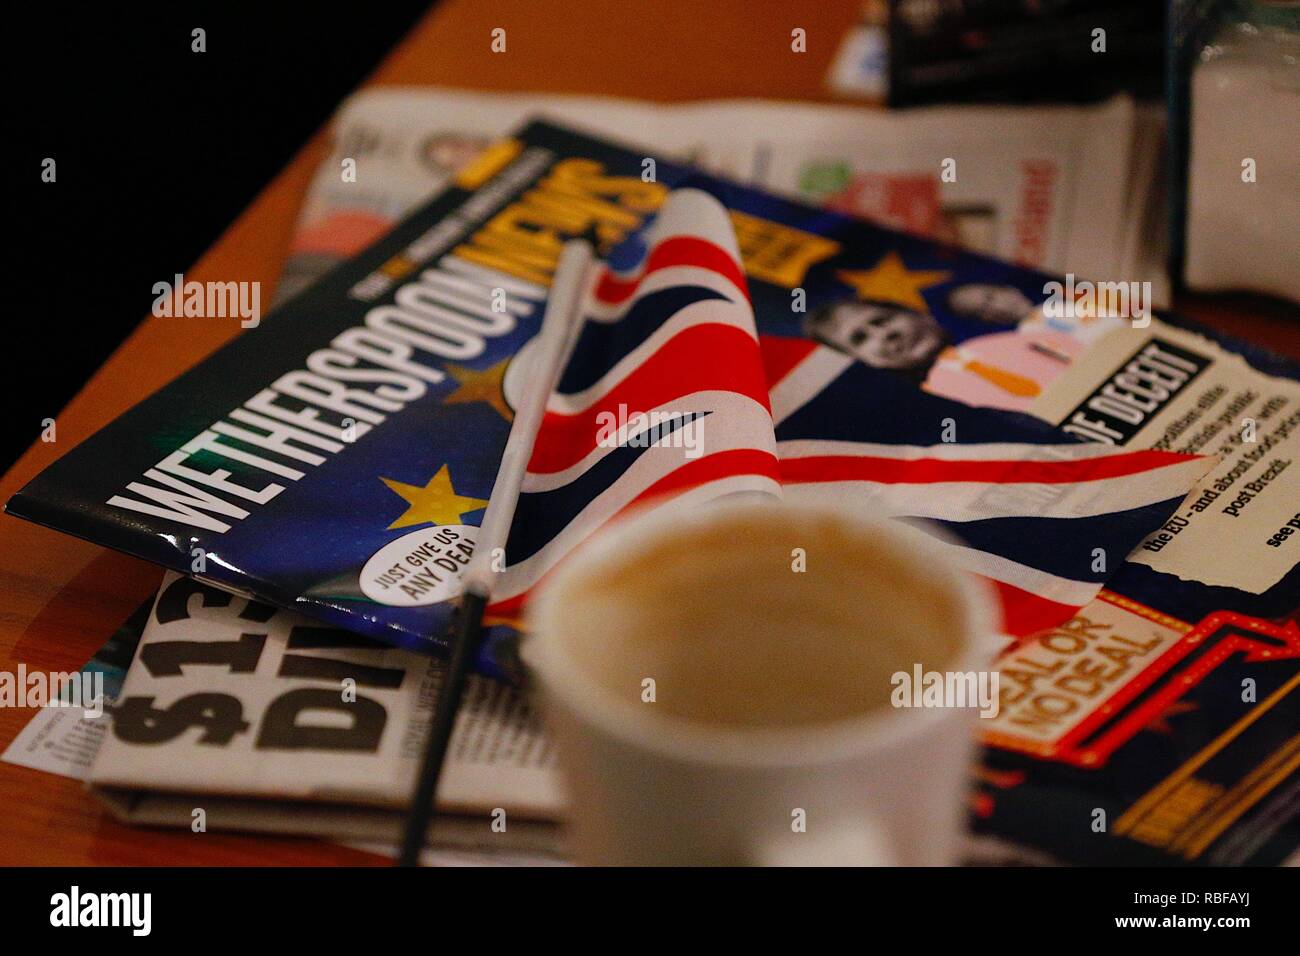 Hastings, East Sussex, UK. 10 Jan, 2019. Wetherspoon founder and chairman Tim Martin visited The John Logie Baird pub in Hastings, East Sussex. He will talk to members of the public about what he considers to be the huge economic advantages of leaving the european union. Wetherspoons news brochure with british flag on a coffee table in the pub. PLEASE SEE IMAGE REF: W6E0FA for updated cleaner image. © Paul Lawrenson 2018, Photo Credit: Paul Lawrenson / Alamy Live News Stock Photo